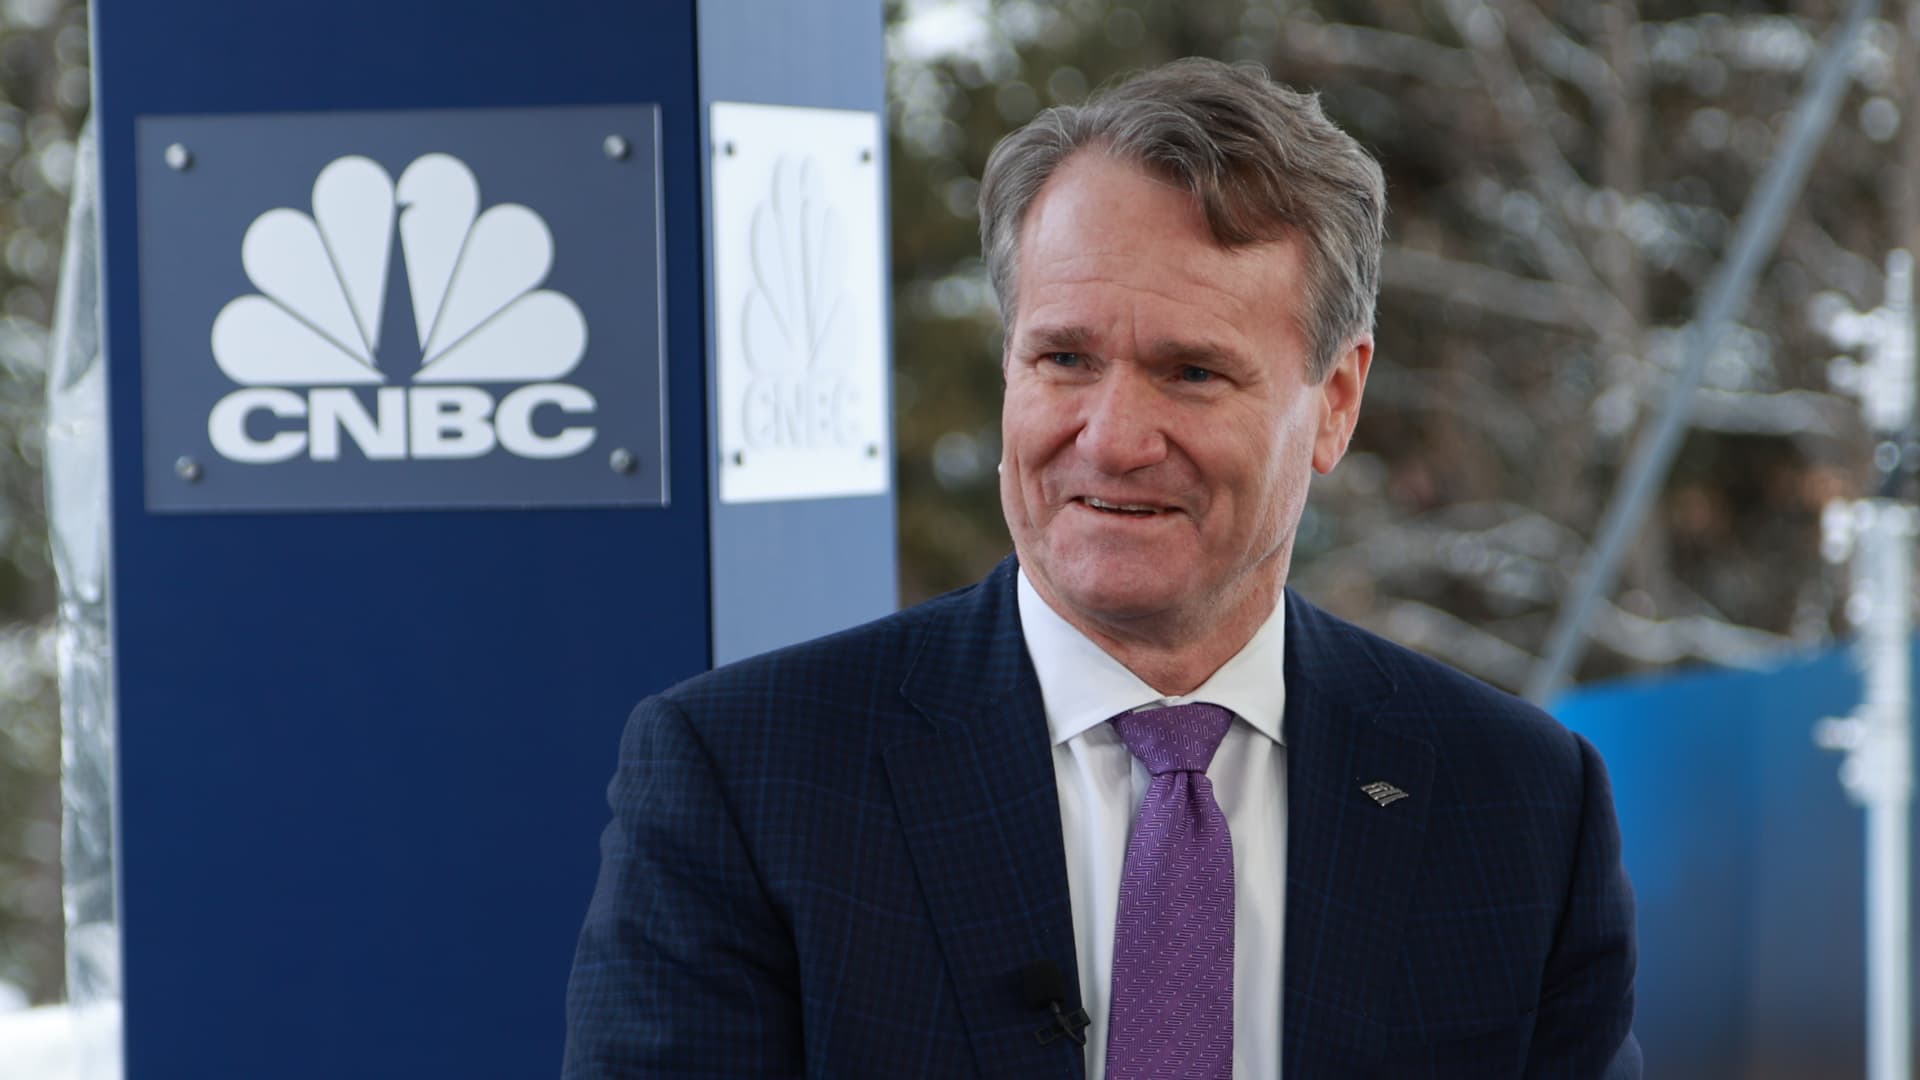 Bank of America posts first-quarter results that top expectations on higher rates